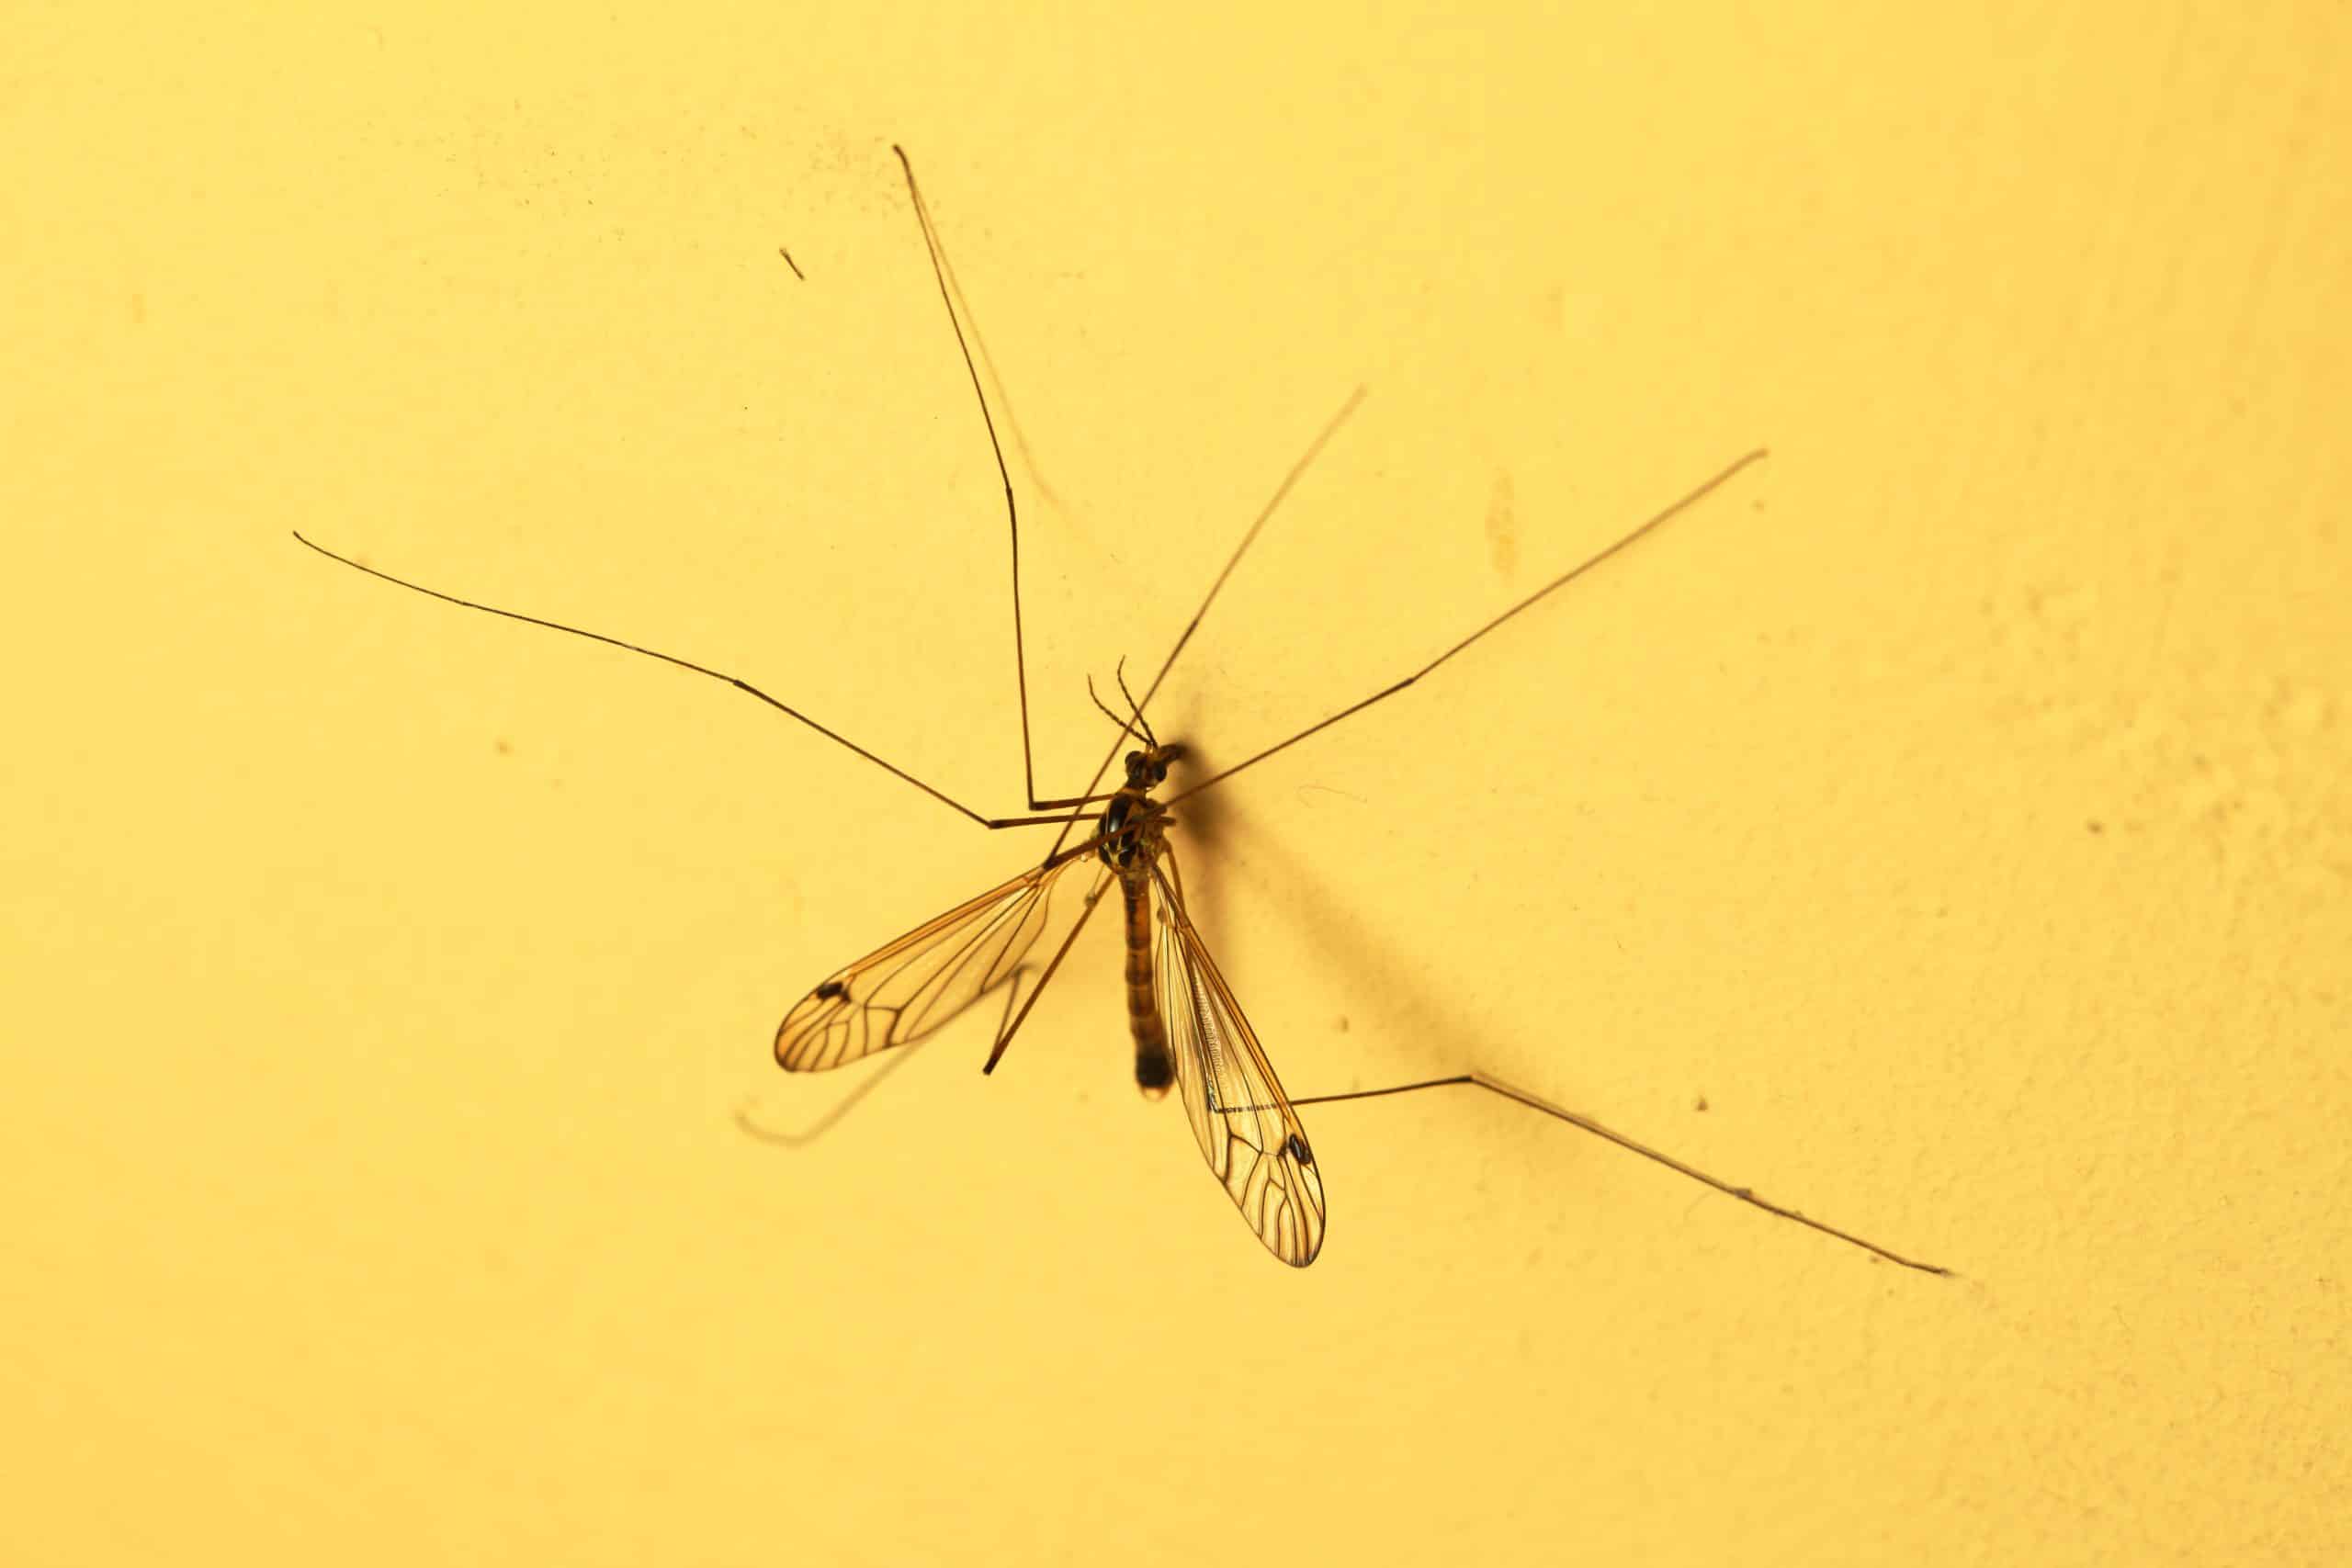 Mosquito on wall - mosquito infestation